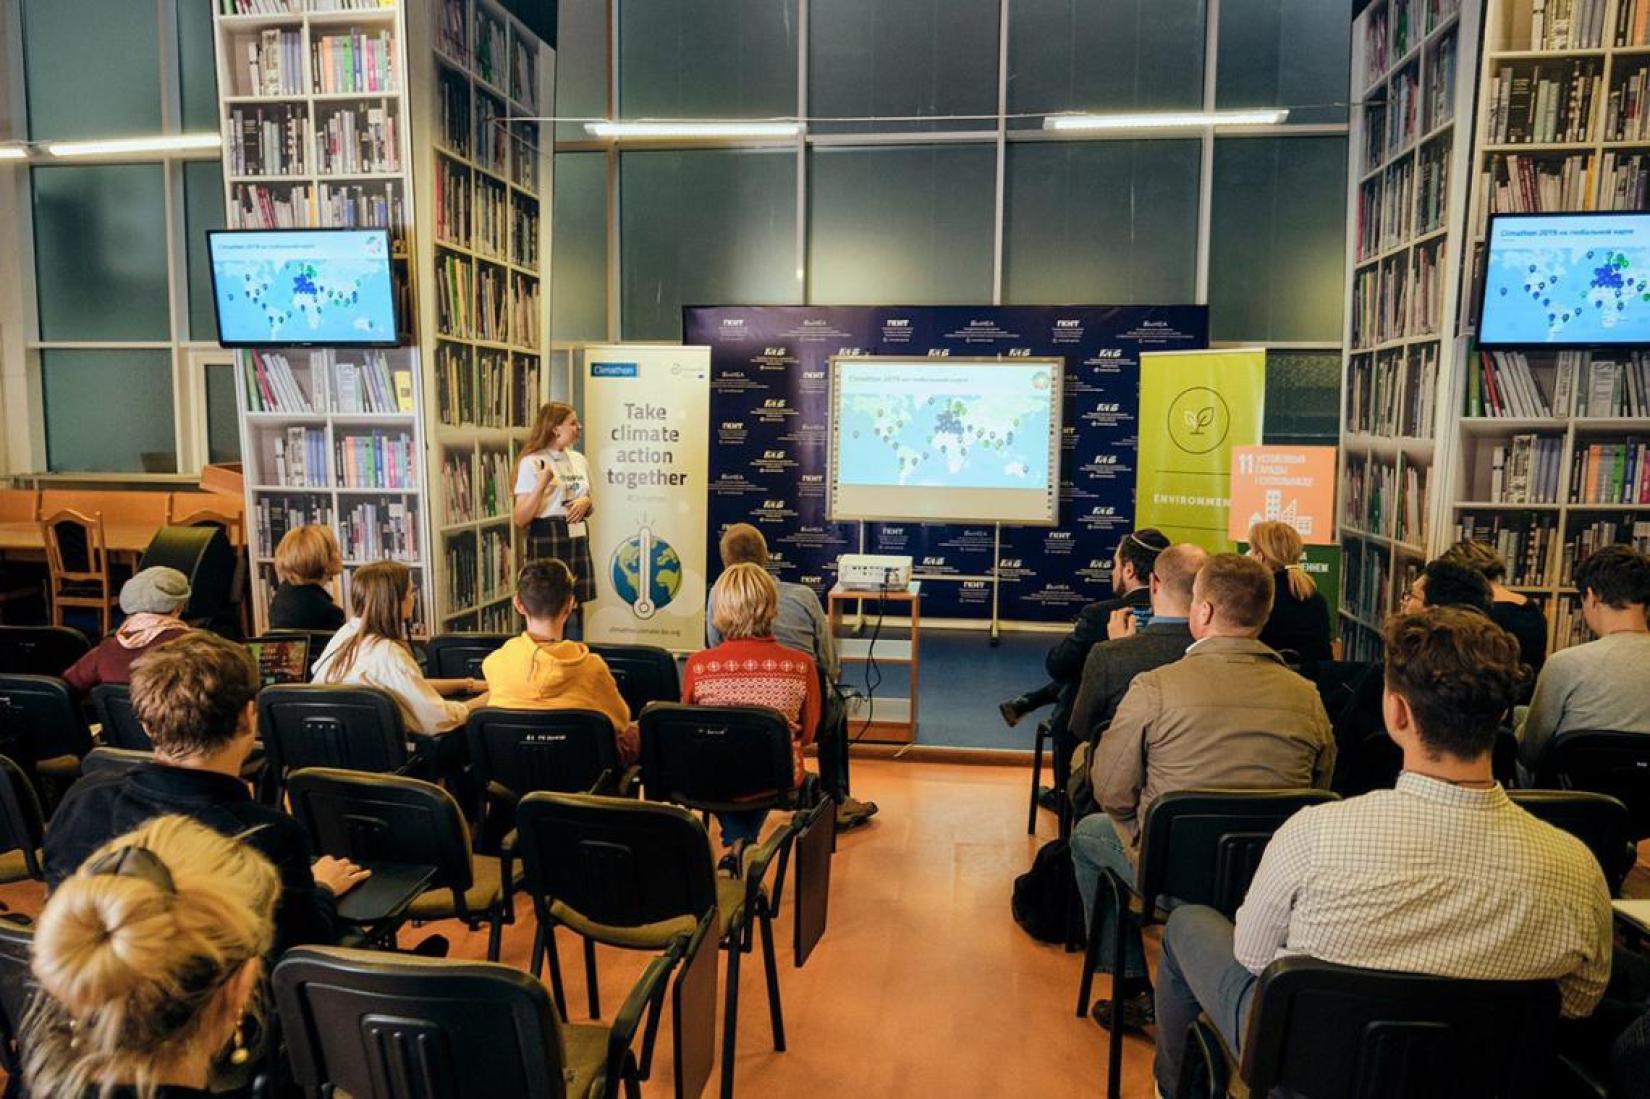 Iryna at Climathon, an event she organized and hosted in October 2019.